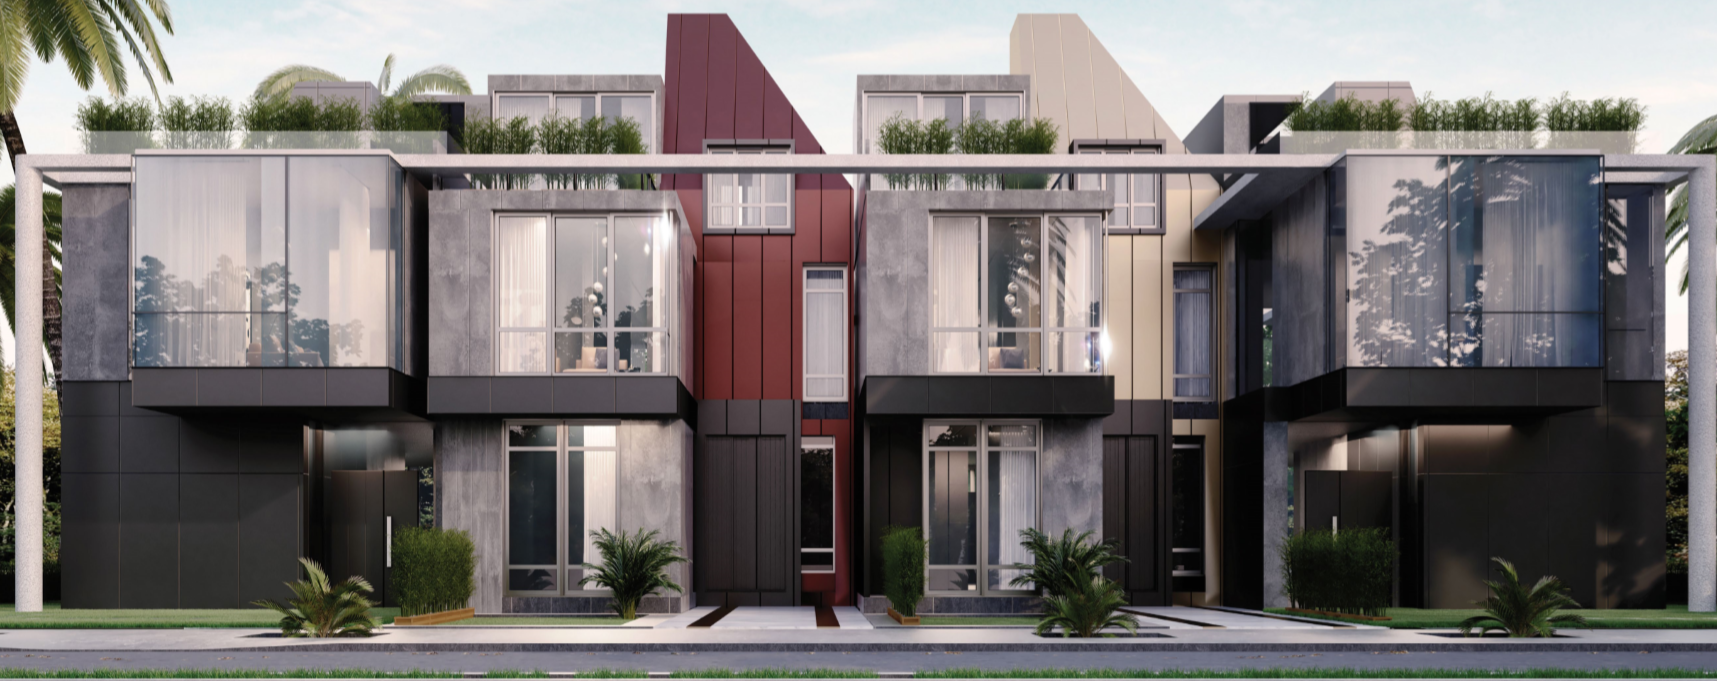 bloomfields_images_5_townhouses